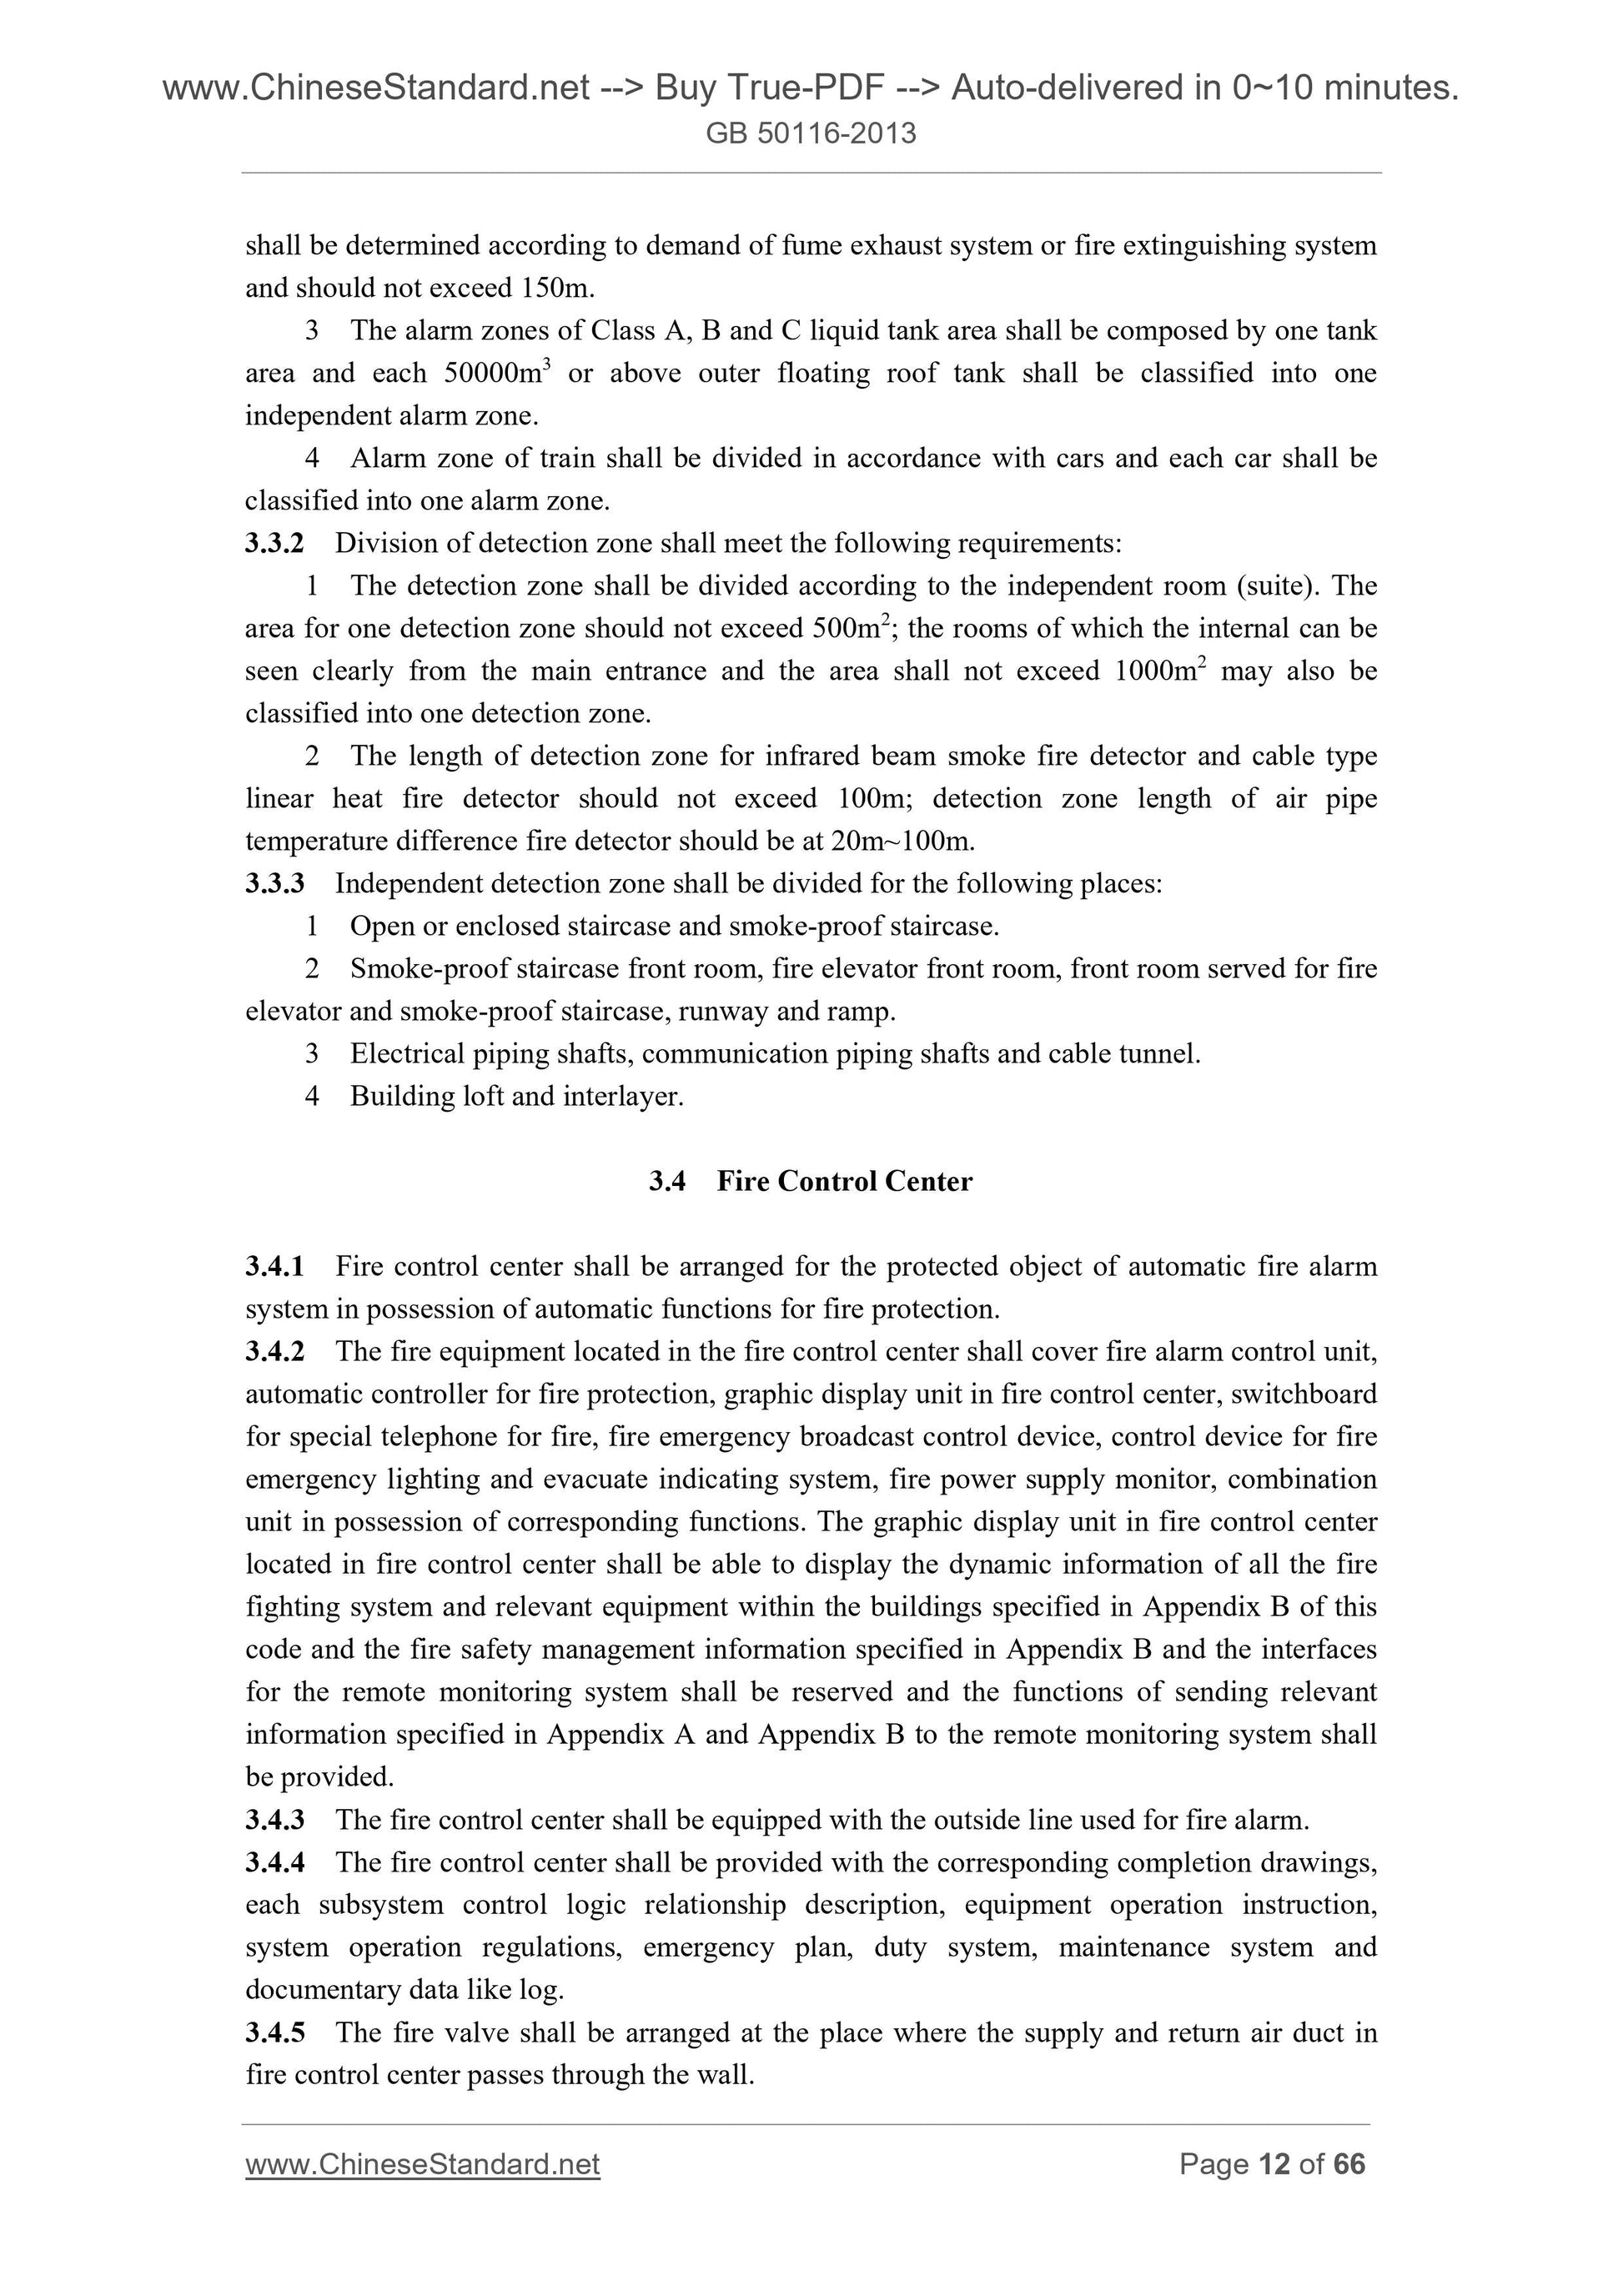 GB 50116-2013 Page 7